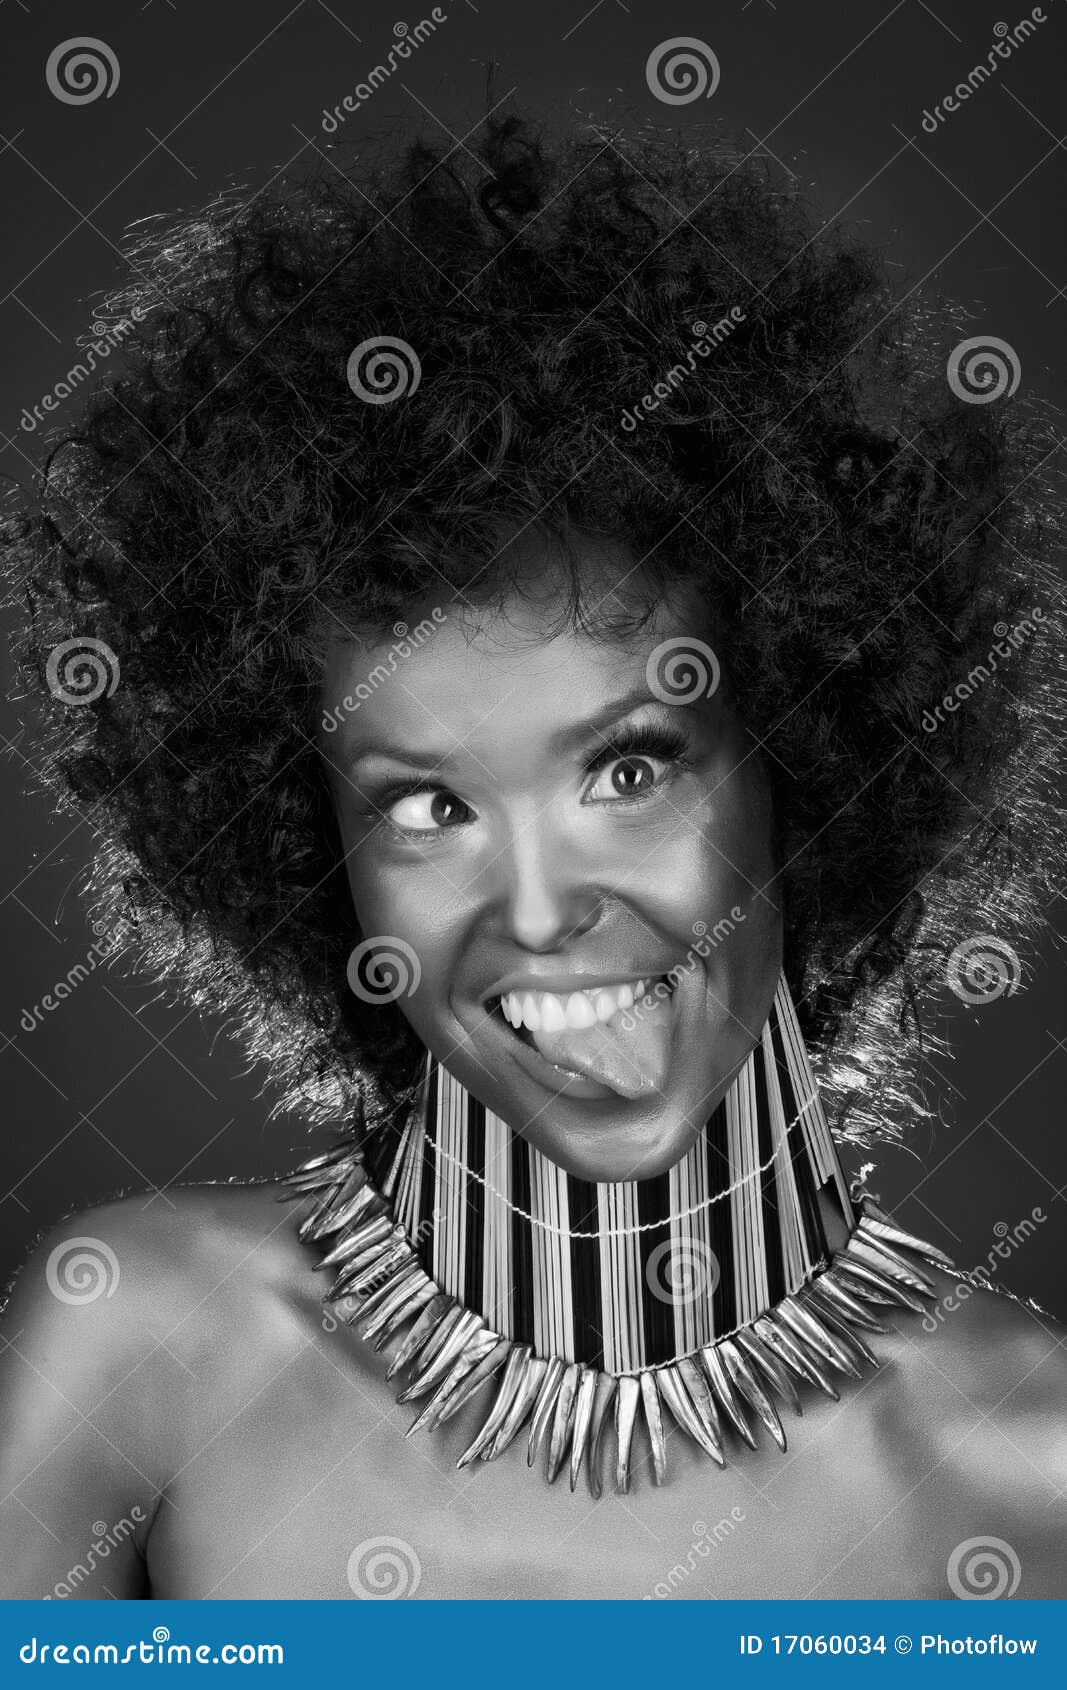 Funny girl with afro hair stock photo. Image of person - 17060034